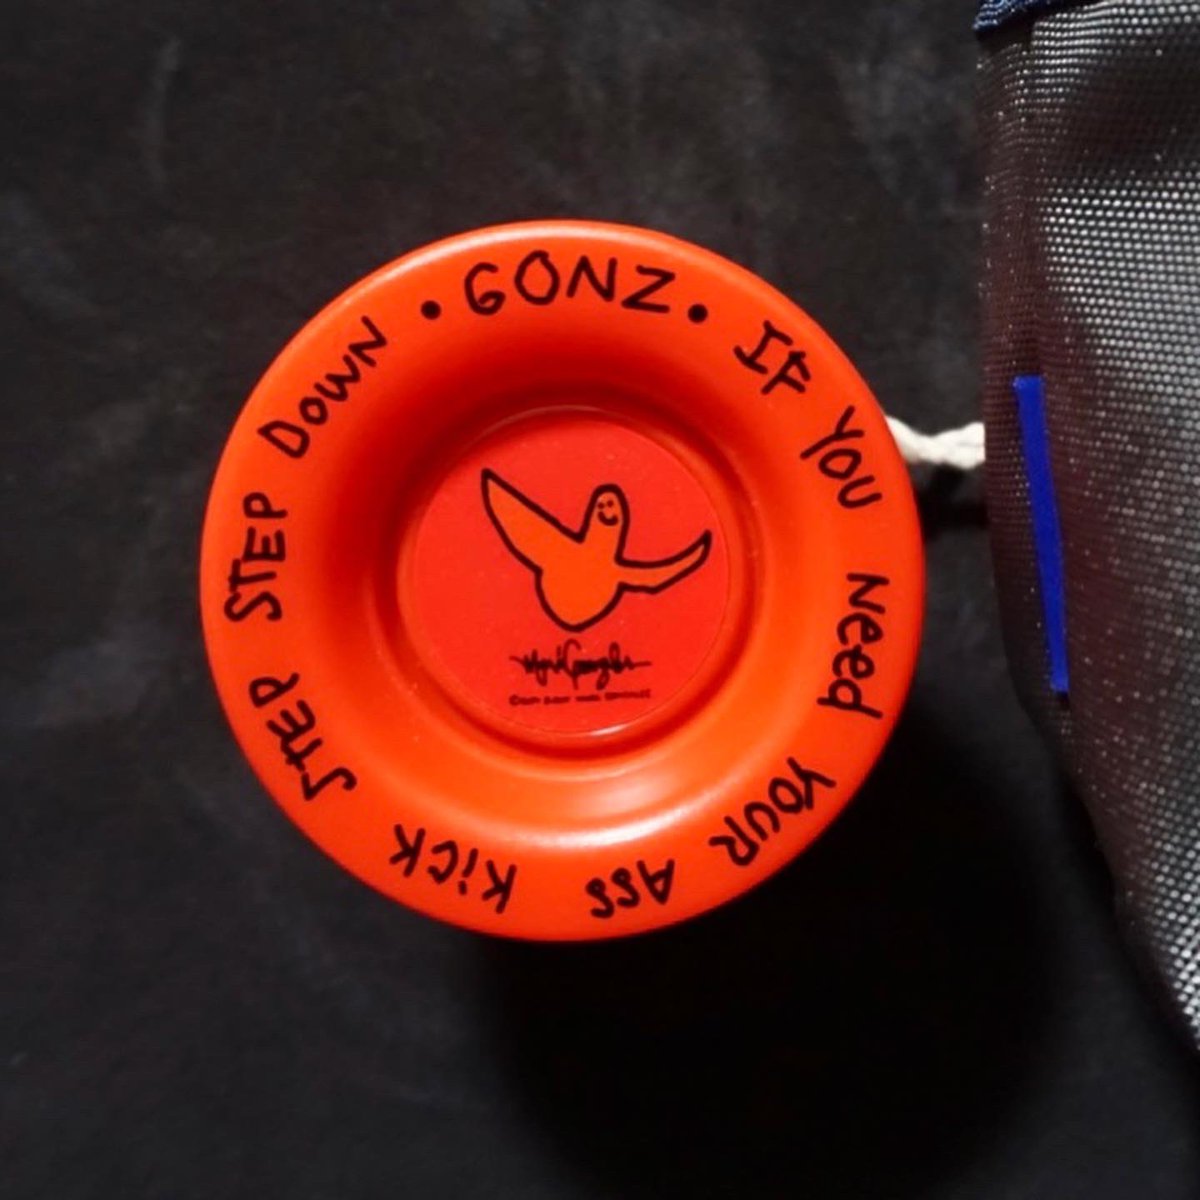 Today's Throw 🪀
Mark Gonzales x MedicomToy

#todaysthrow
#gonz
#markgonzales 
#freshthings
#ヨーヨー